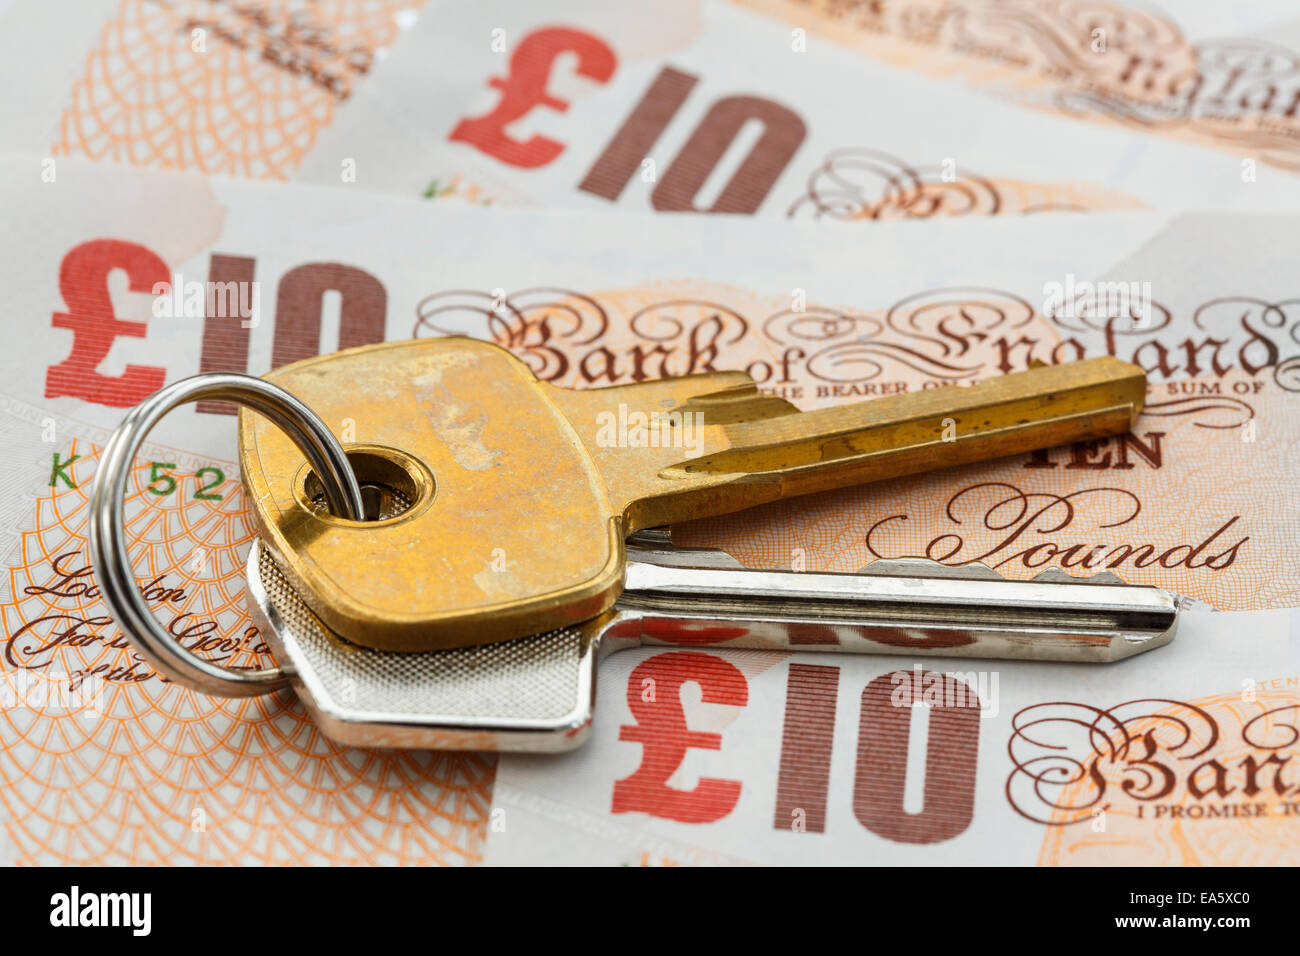 House keys on money sterling ten pound notes GBP to illustrate UK property prices savings and investment concept. England, UK, Britain Stock Photo